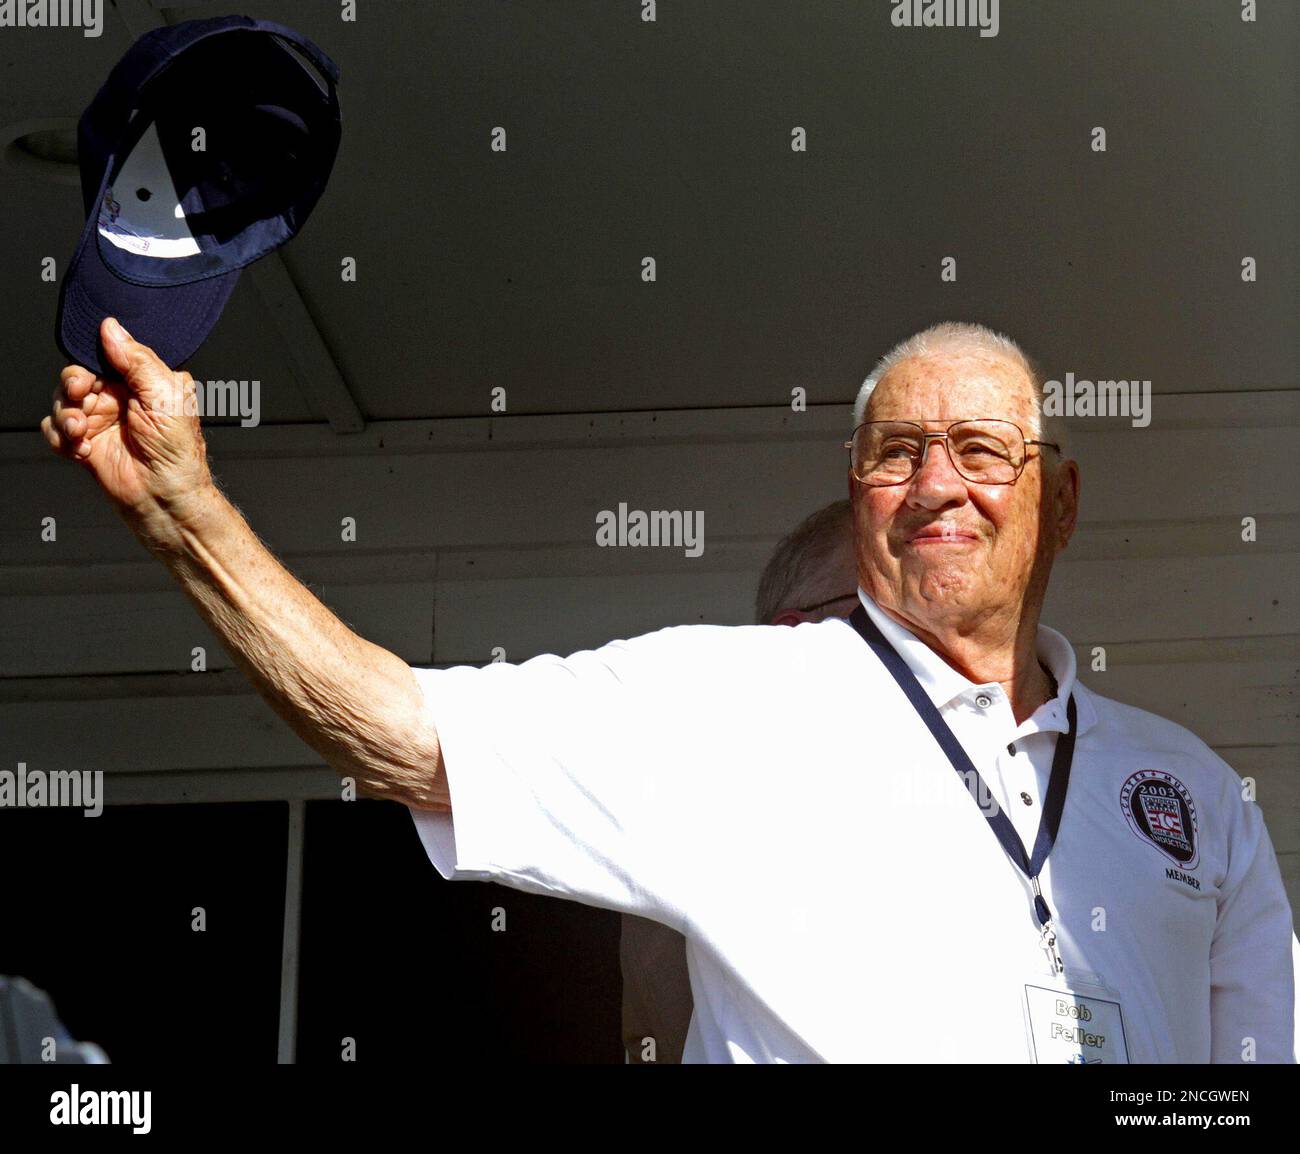 Baseball Hall of Famer Bob Feller waves to fans during ribbon cutting  ceremonies for Hank Aaron's Childhood Home and Museum April 14, 2010 at  Hank Aaron Stadium in Mobile, Ala. Feller, one